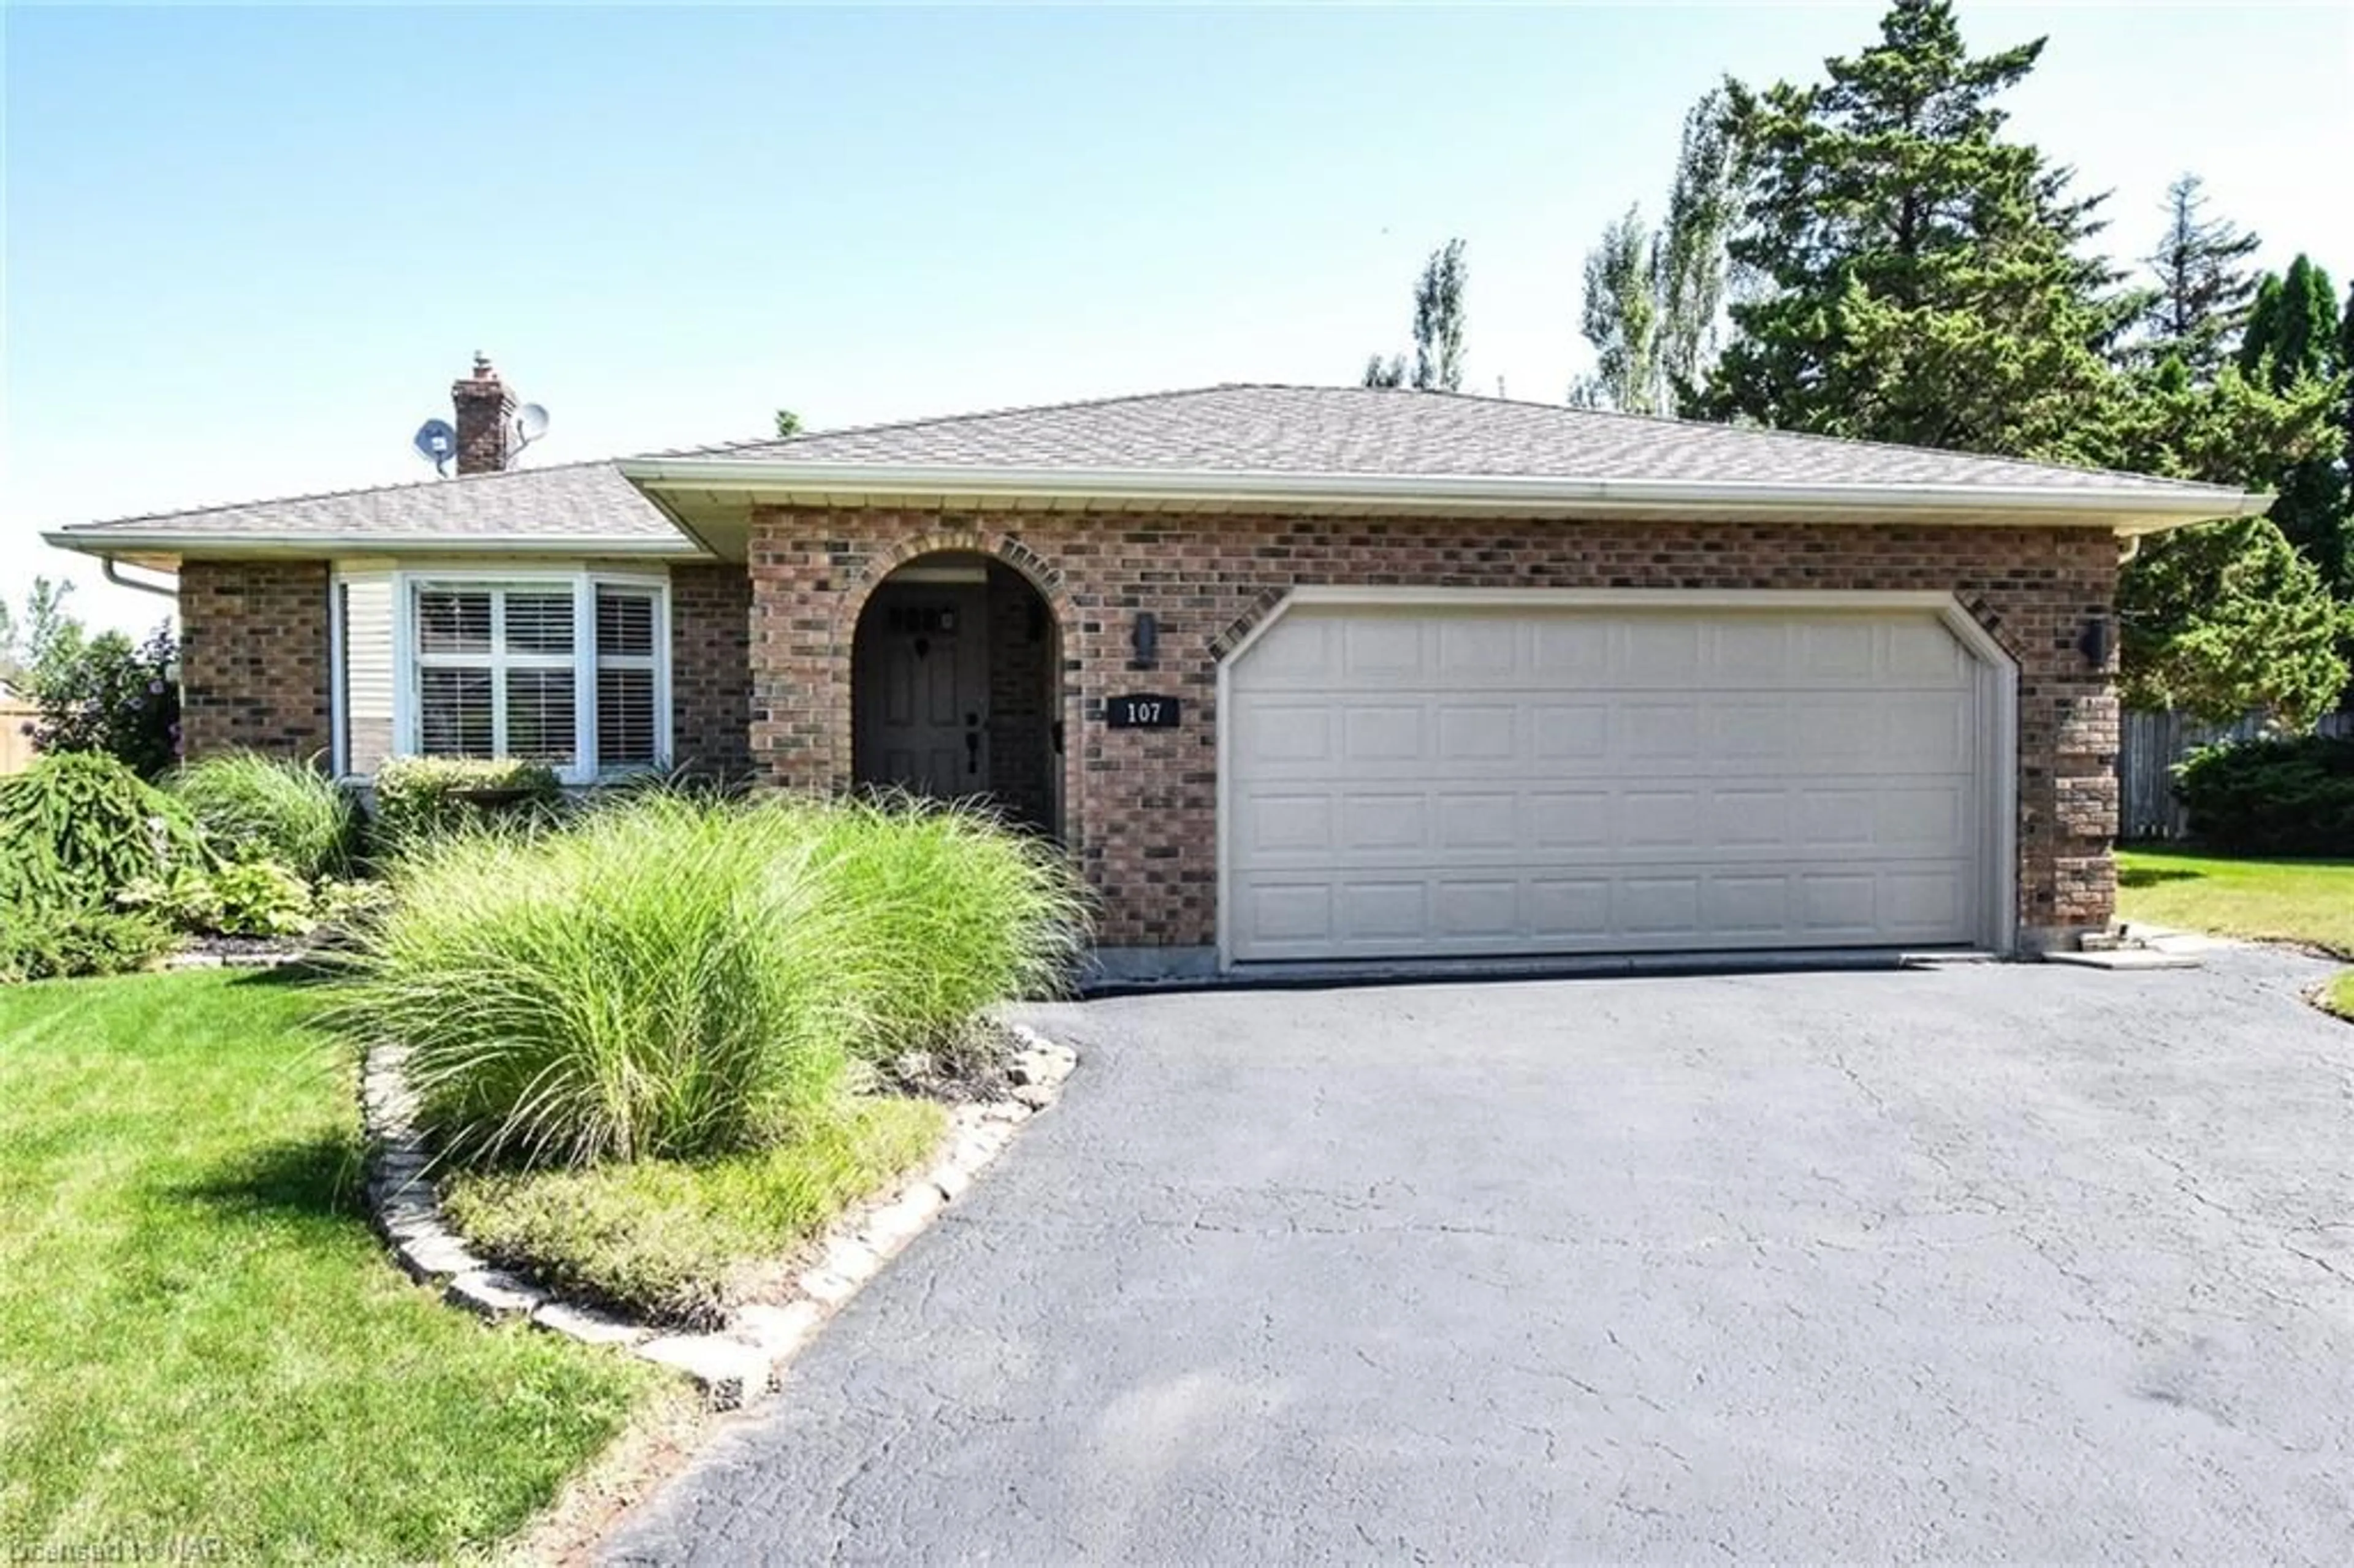 Home with brick exterior material for 107 Melissa Cres, Welland Ontario L3C 6M5